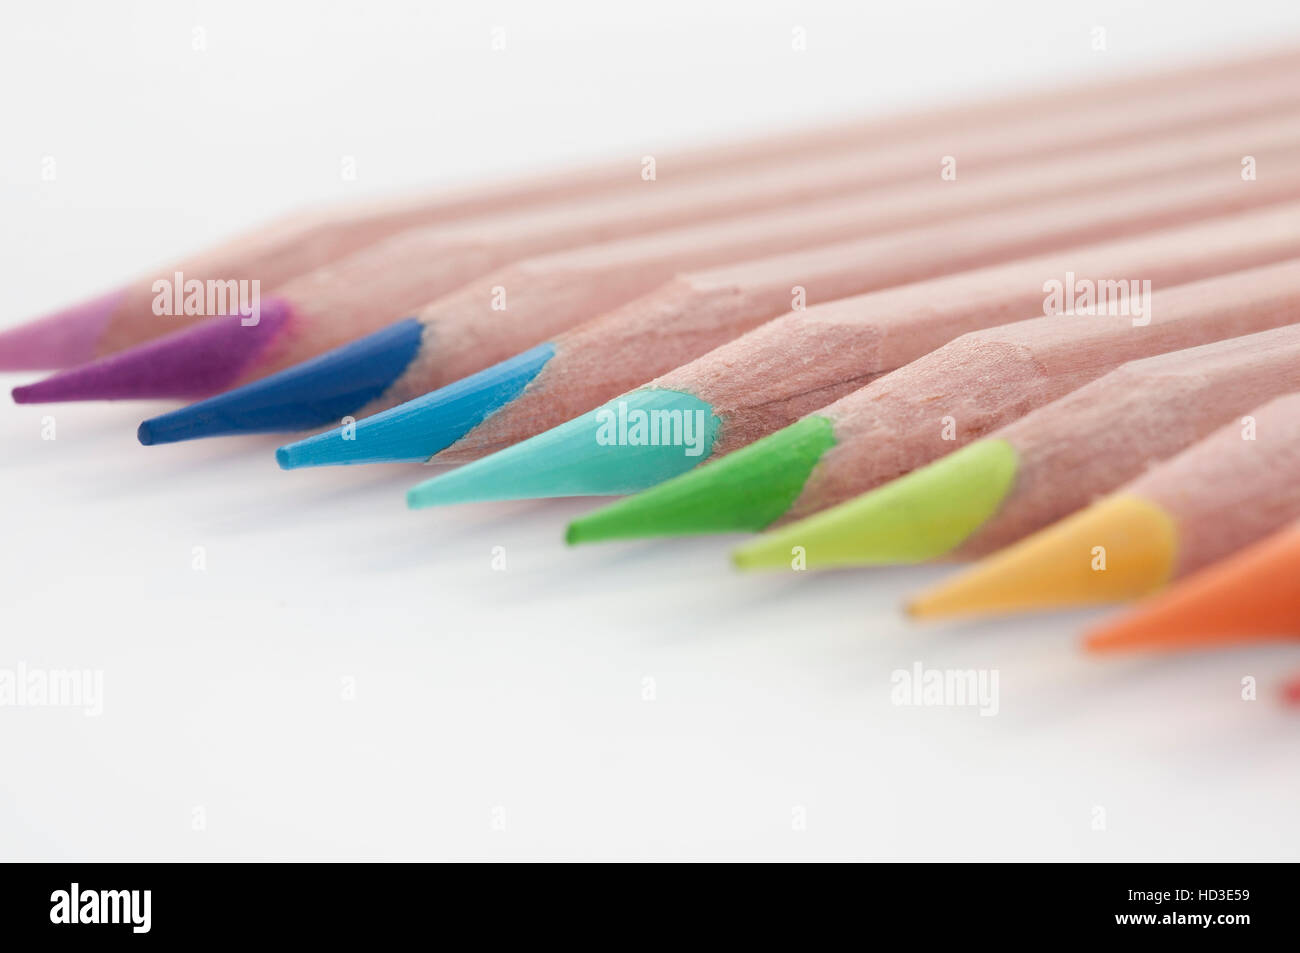 Colouring pencils lined up together, focused on blue pencils Stock Photo